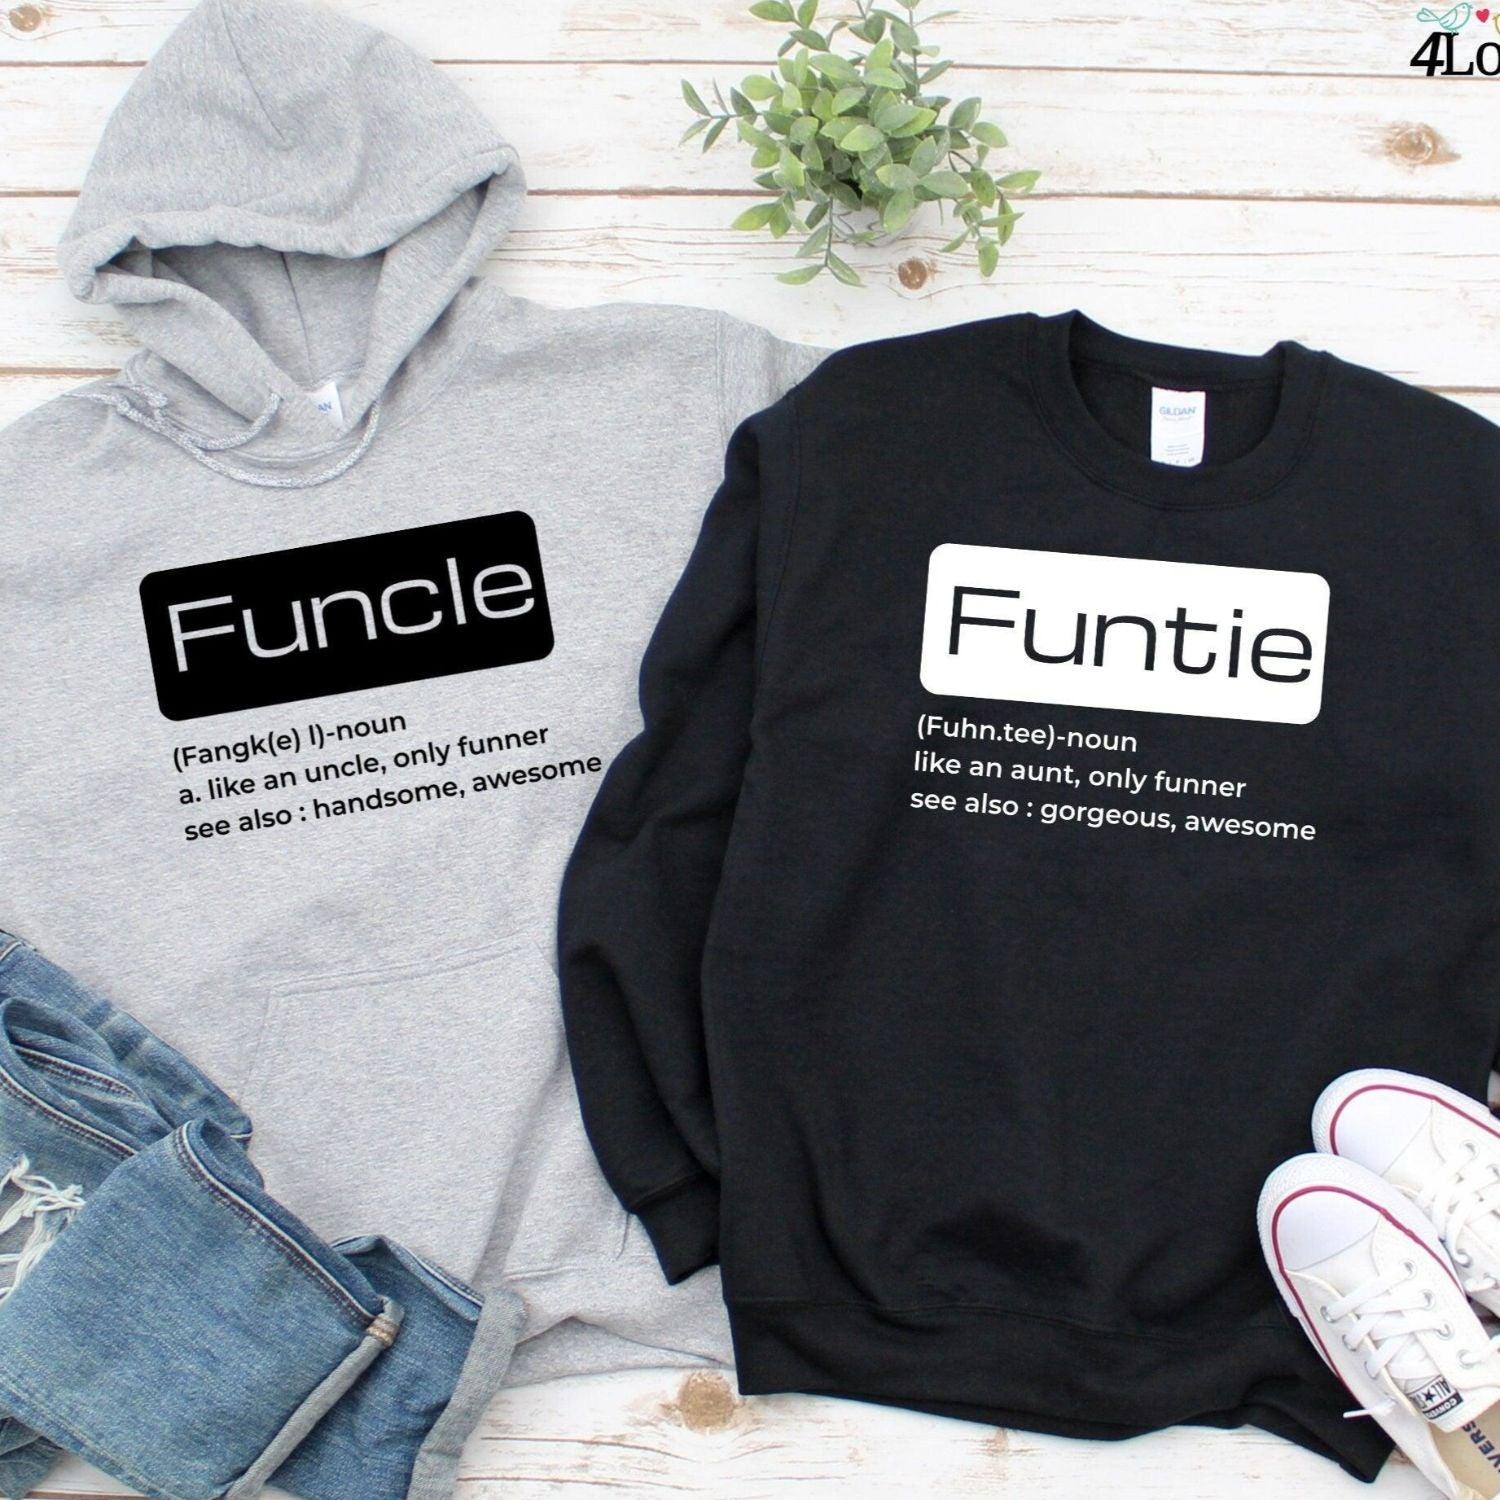 Humorous Family Matching Outfits: Amusing Uncle & Aunt Presents, Funcle & Funtie Defined Sets - 4Lovebirds